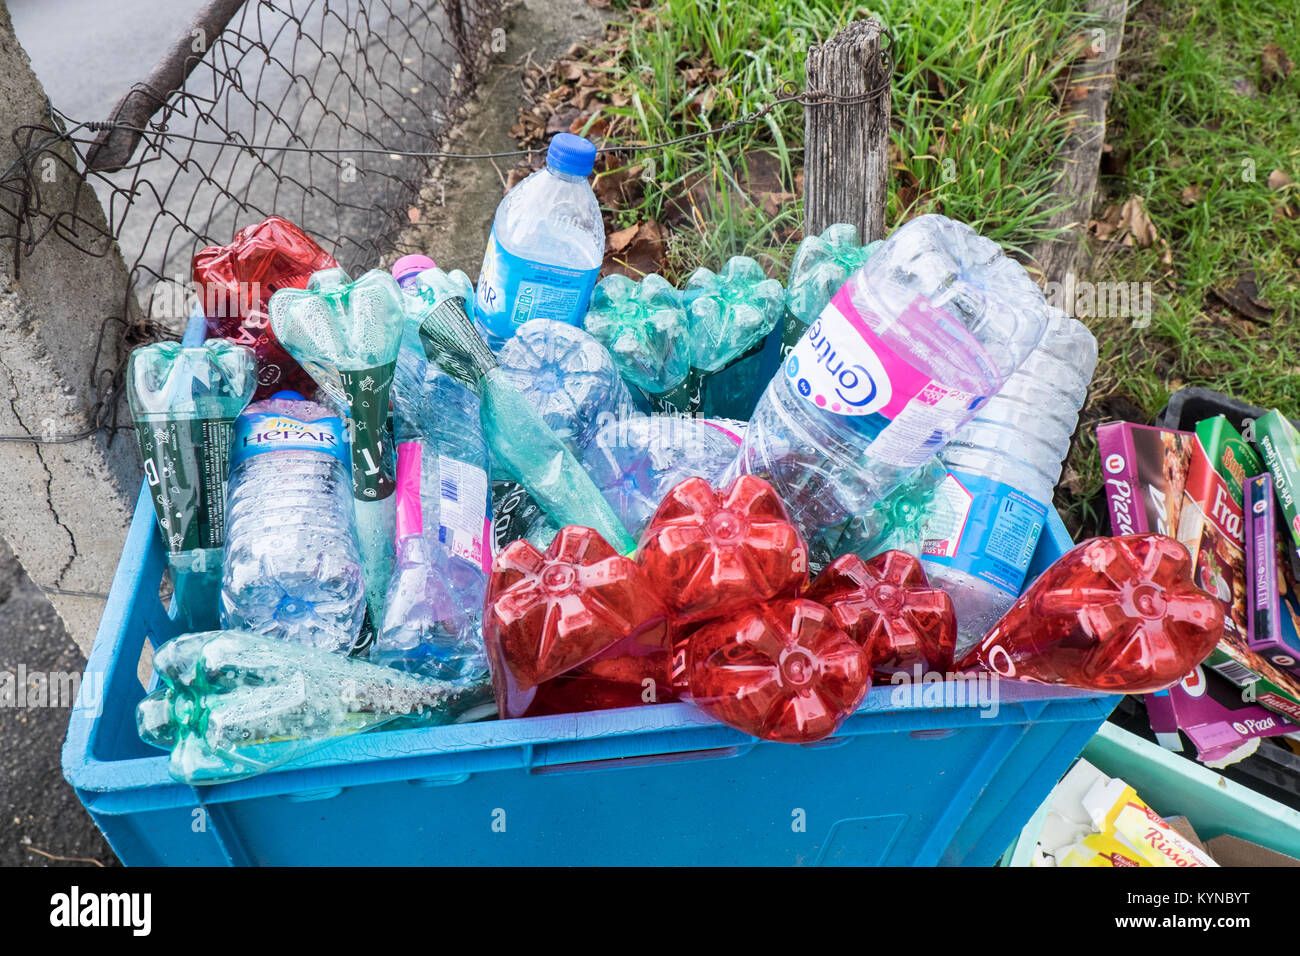 Plastic,bottle,bottles,rubbish,waste,garbage,put,out,for,collection,by,council, authorities,in,village,Montazels,near Couiza,Aude,South,of,France, Stock Photo